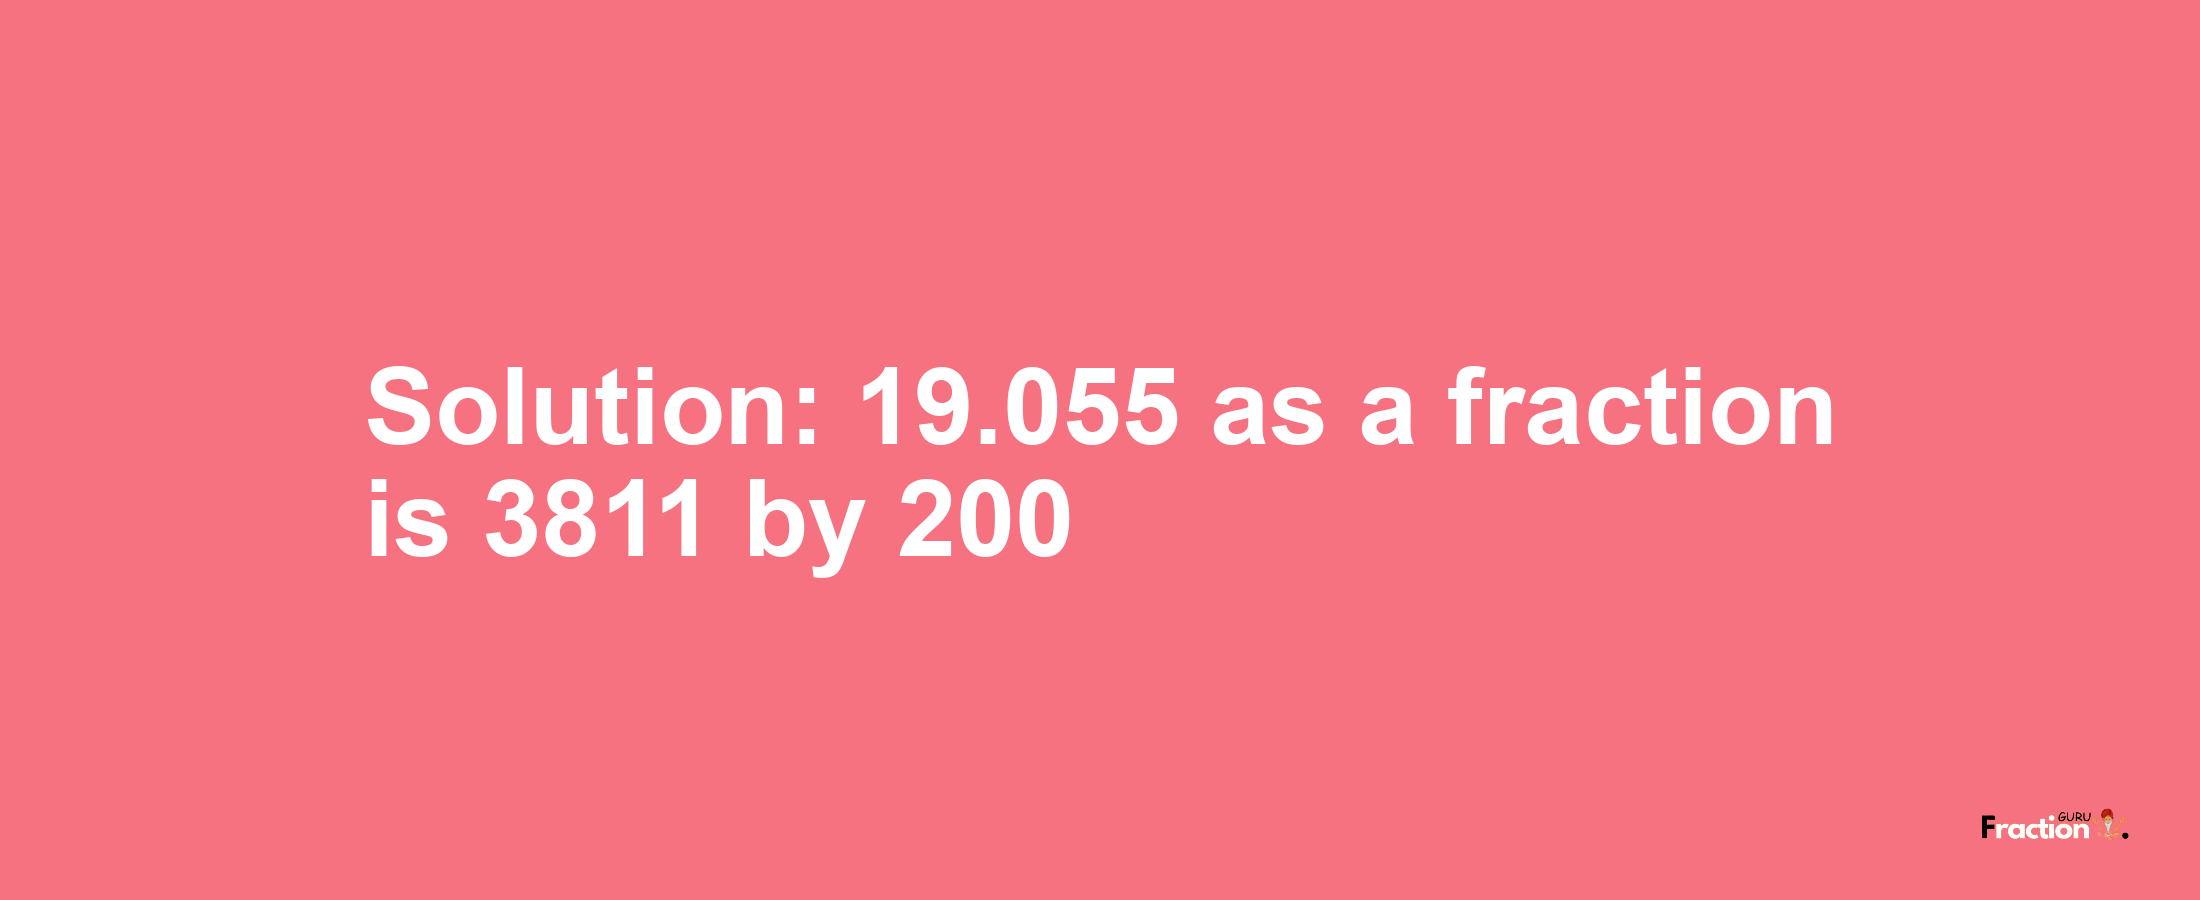 Solution:19.055 as a fraction is 3811/200